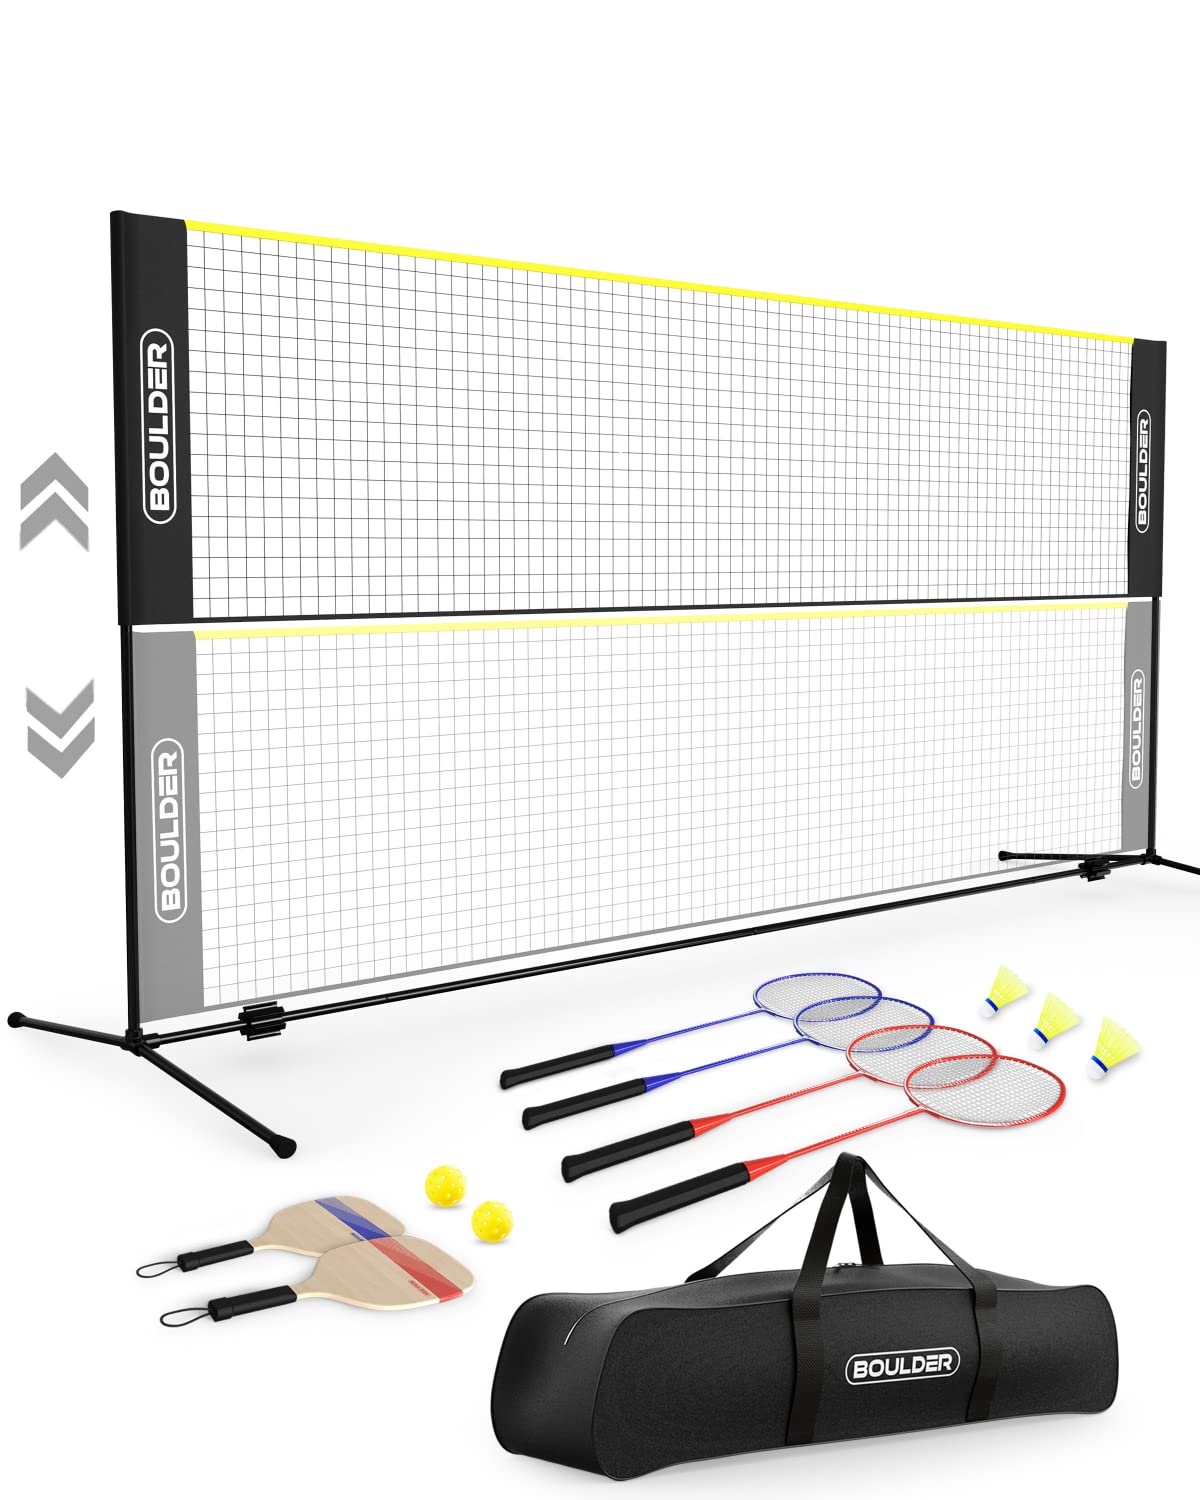 Boulder Sports Outdoor Net Set - All-in-One Badminton, Pickleball & Kids Volleyball Net (10ft Wide x 5ft max Height) Sports Set 